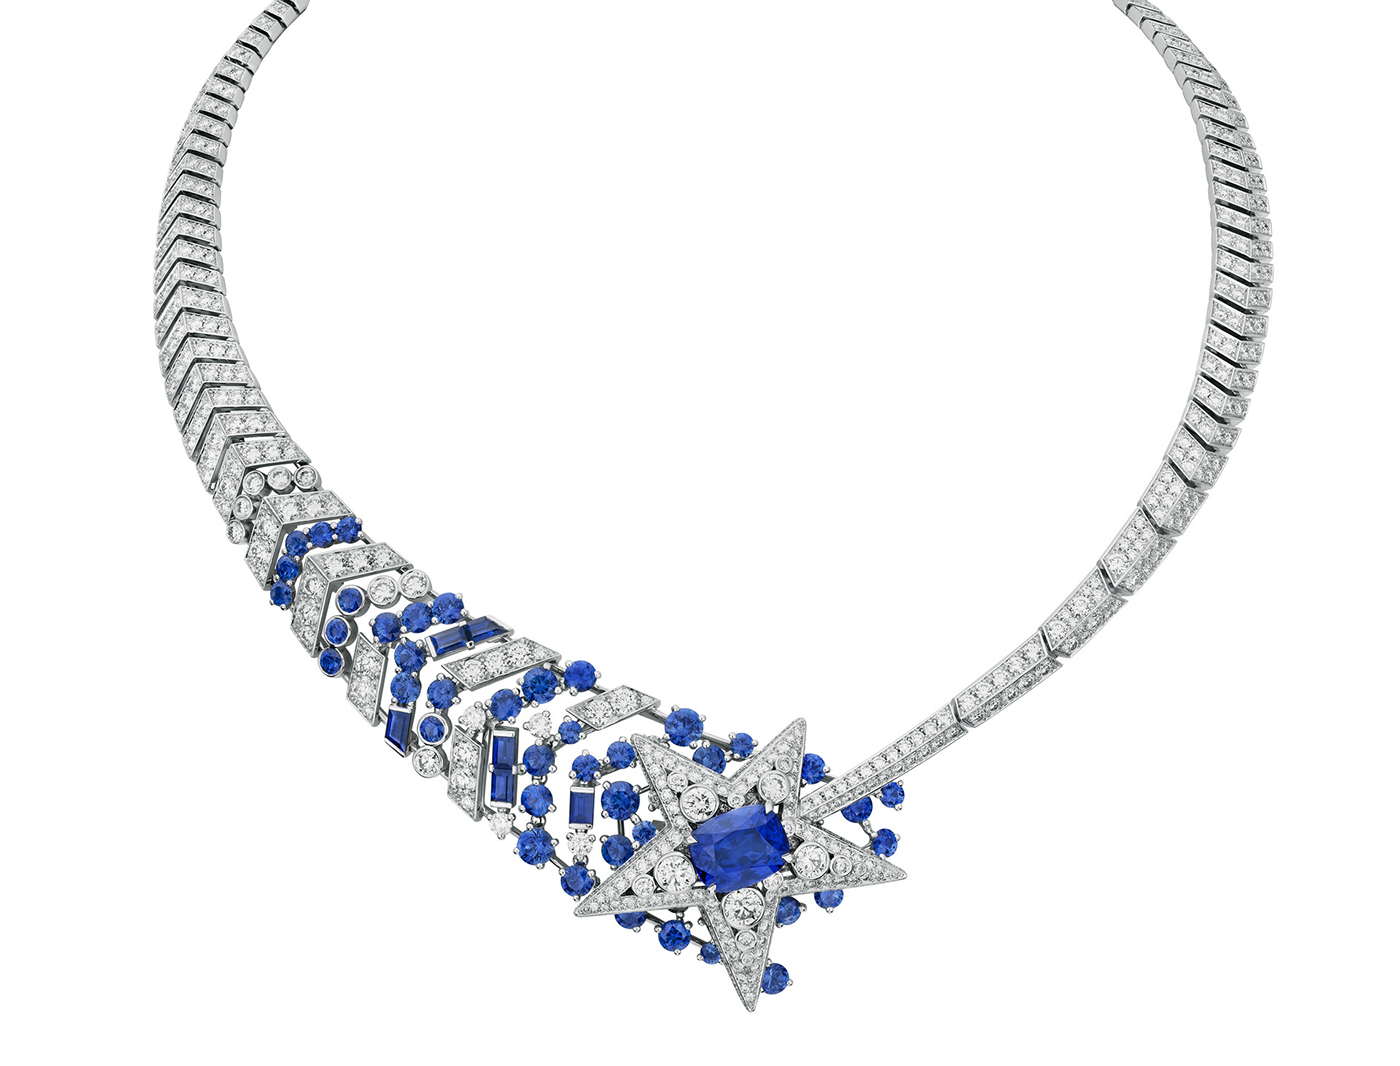 CHANEL HIGH JEWELLERY: 1932 COLLECTION